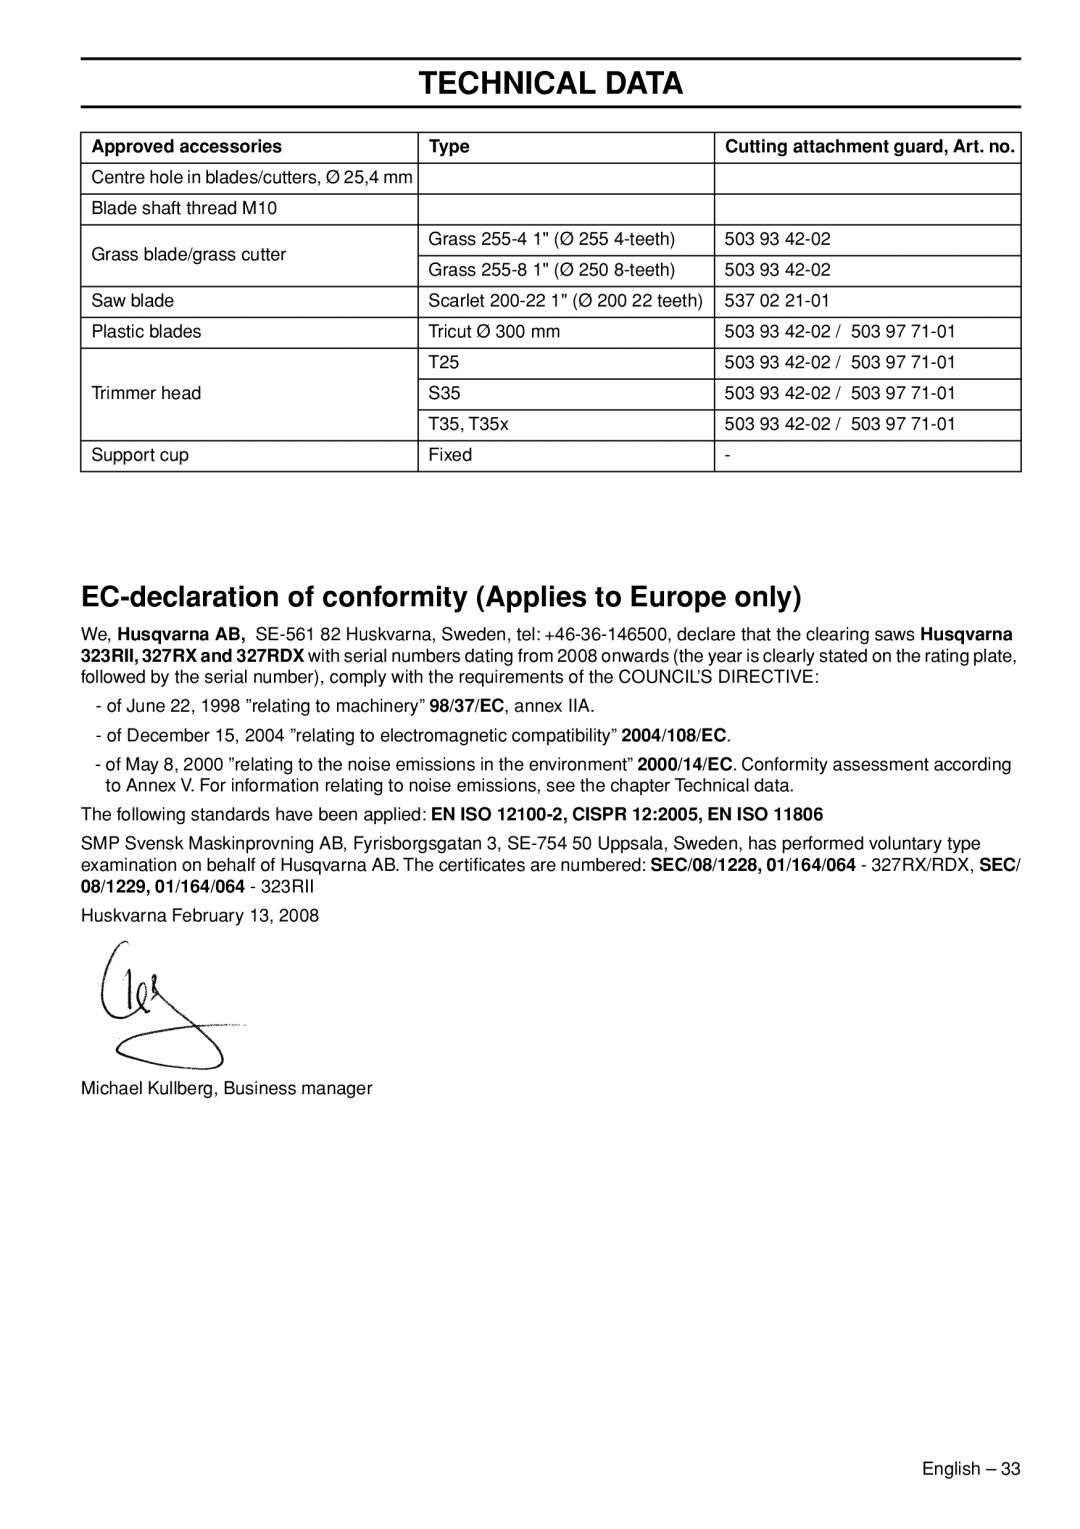 Husqvarna 327RDX, 327RX EC-declaration of conformity Applies to Europe only, Approved accessories, Type, Technical Data 